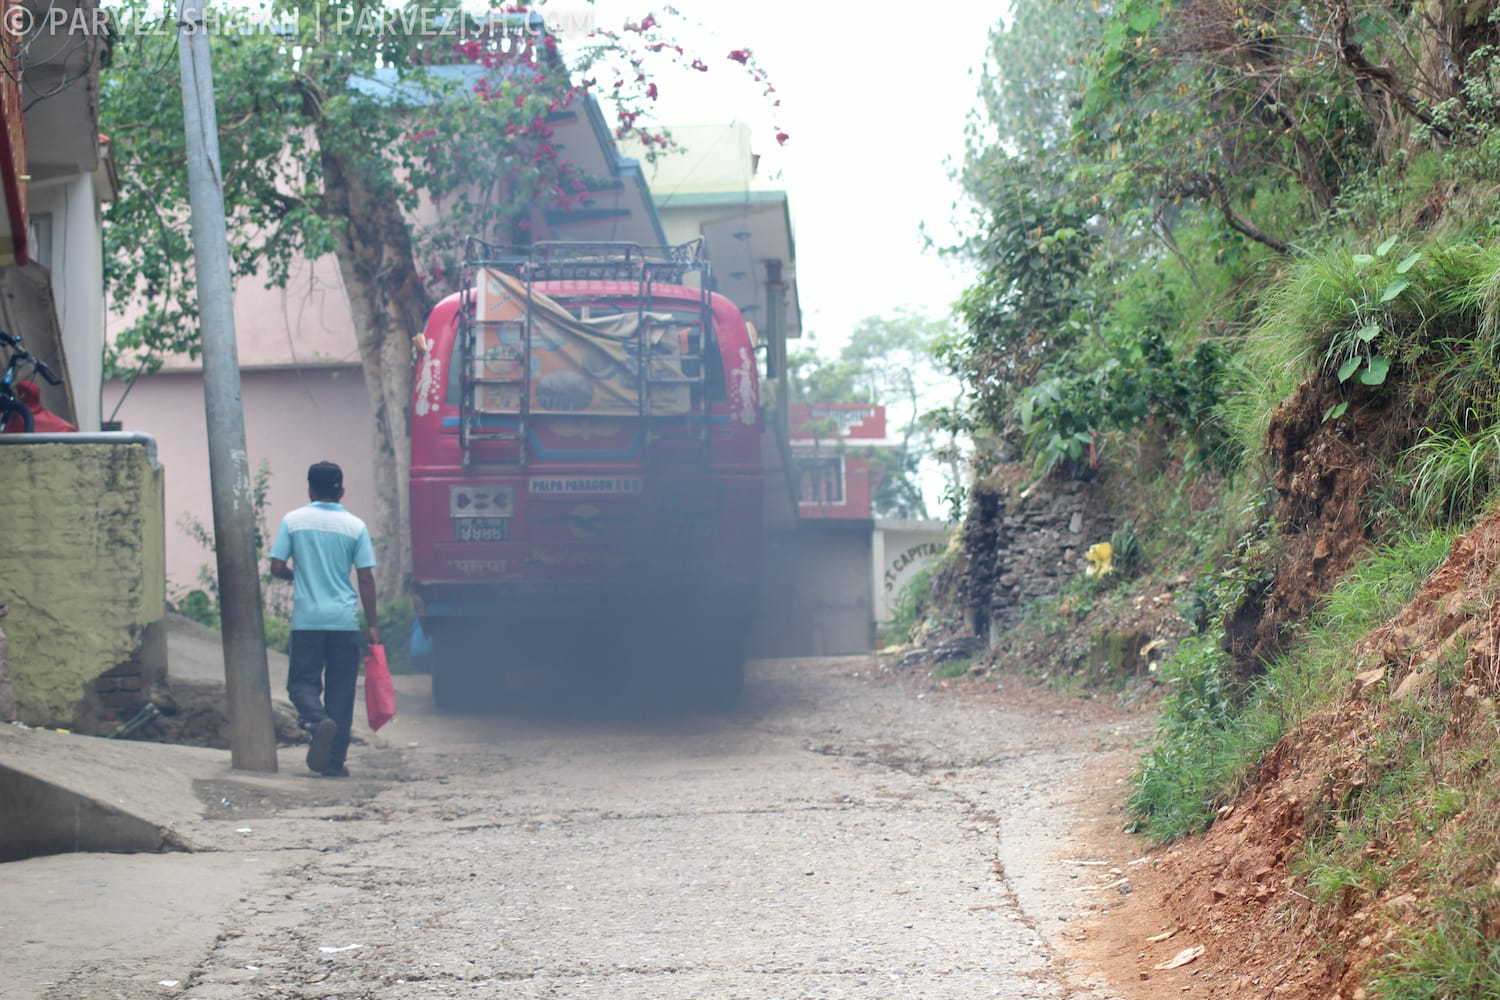 A Bus on the Roads of Tansen